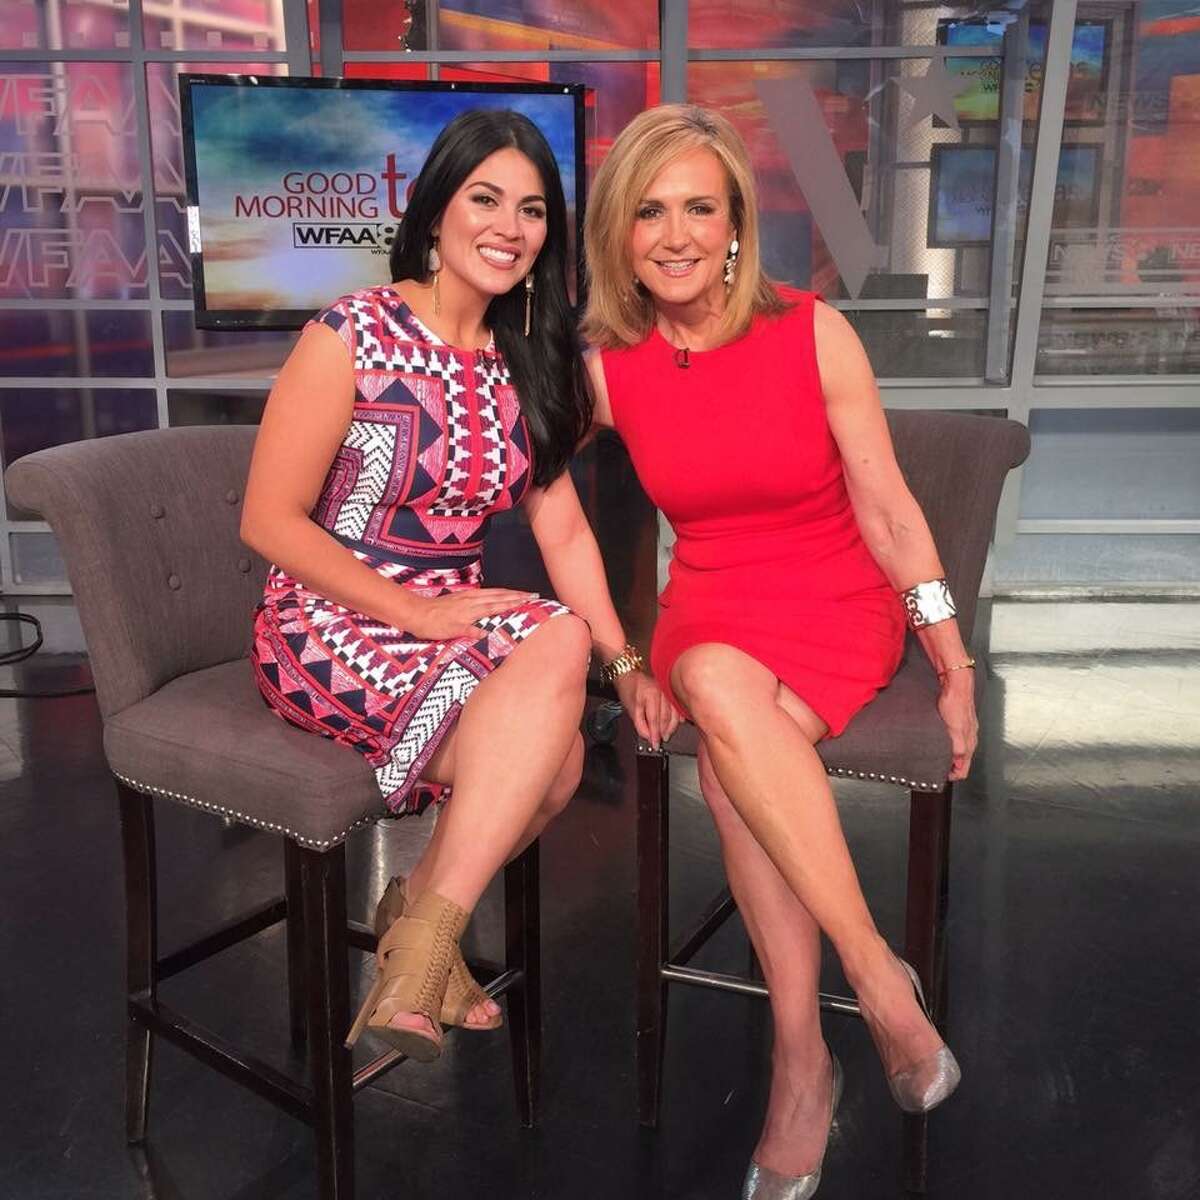 Alanna Sarabia, previously a staple of San Antonio's WOAI-TV, said she has developed a nice chemistry with her new air partner Jane McGarry (right), co-host on WFAA-TV's  'Good Morning Texas' in Dallas.